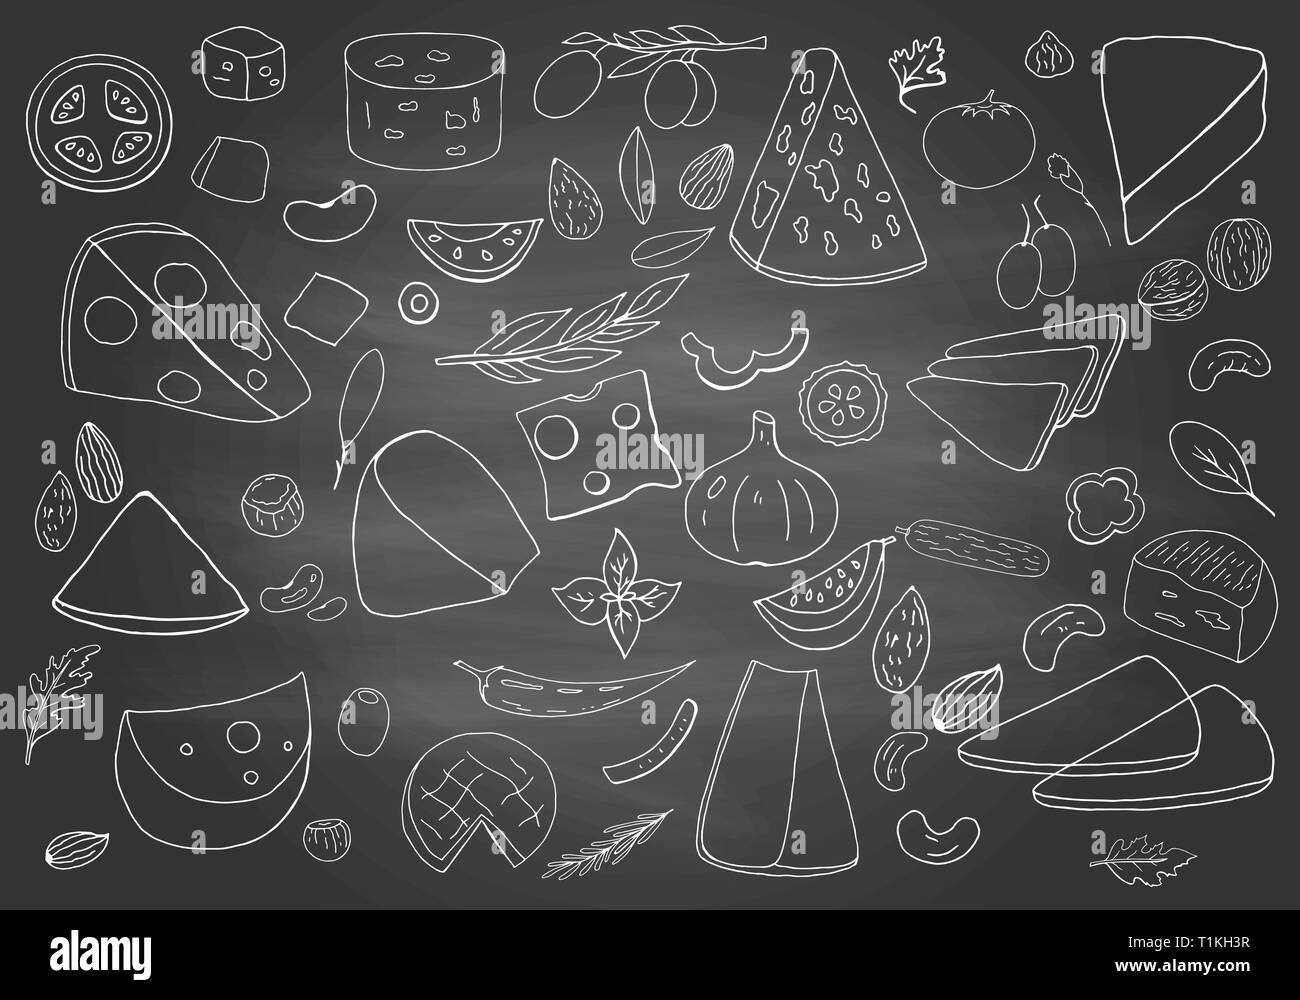 Vintage hand drawn different types of cheeses on chalkboard.  Stock Vector